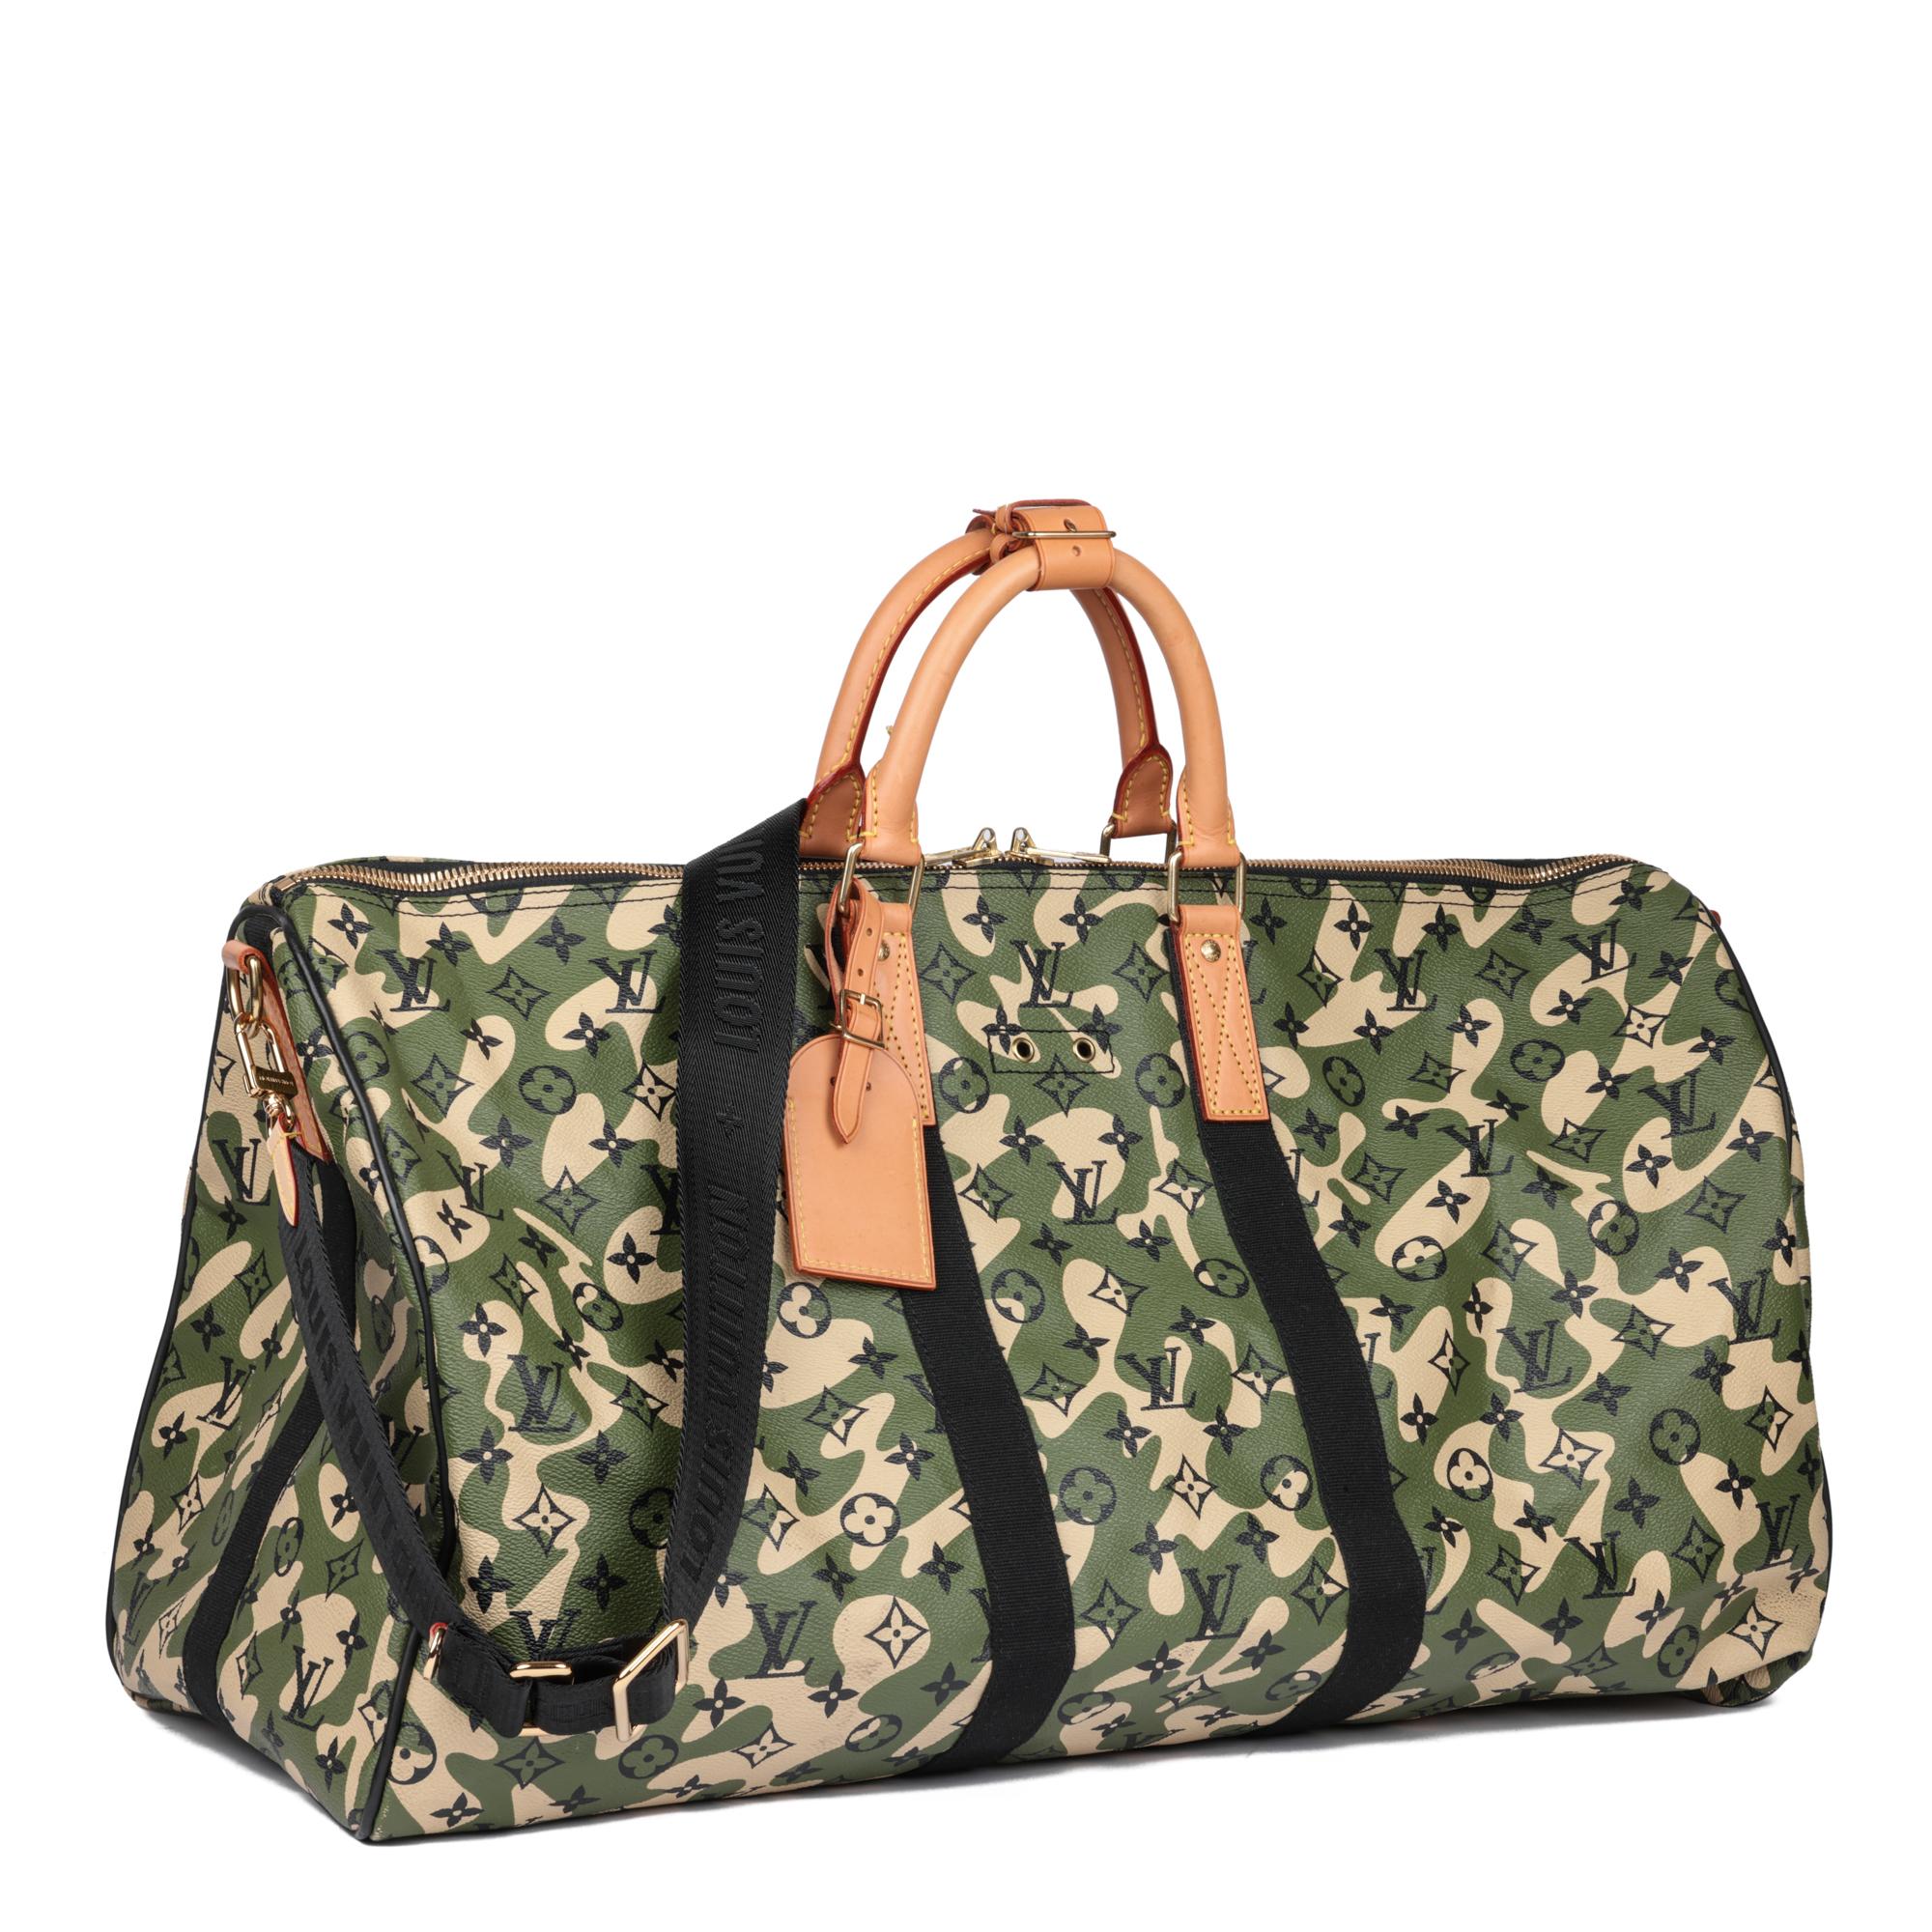 LOUIS VUITTON
x Takashi Murakami Green Monogramouflage Monogram Coated Canvas & Vachetta Leather Keepall 55 Bandoulière

Xupes Reference: HB5104
Serial Number: MB2038
Age (Circa): 2008
Accompanied By: Louis Vuitton Dust Bag, 2022 Replacement